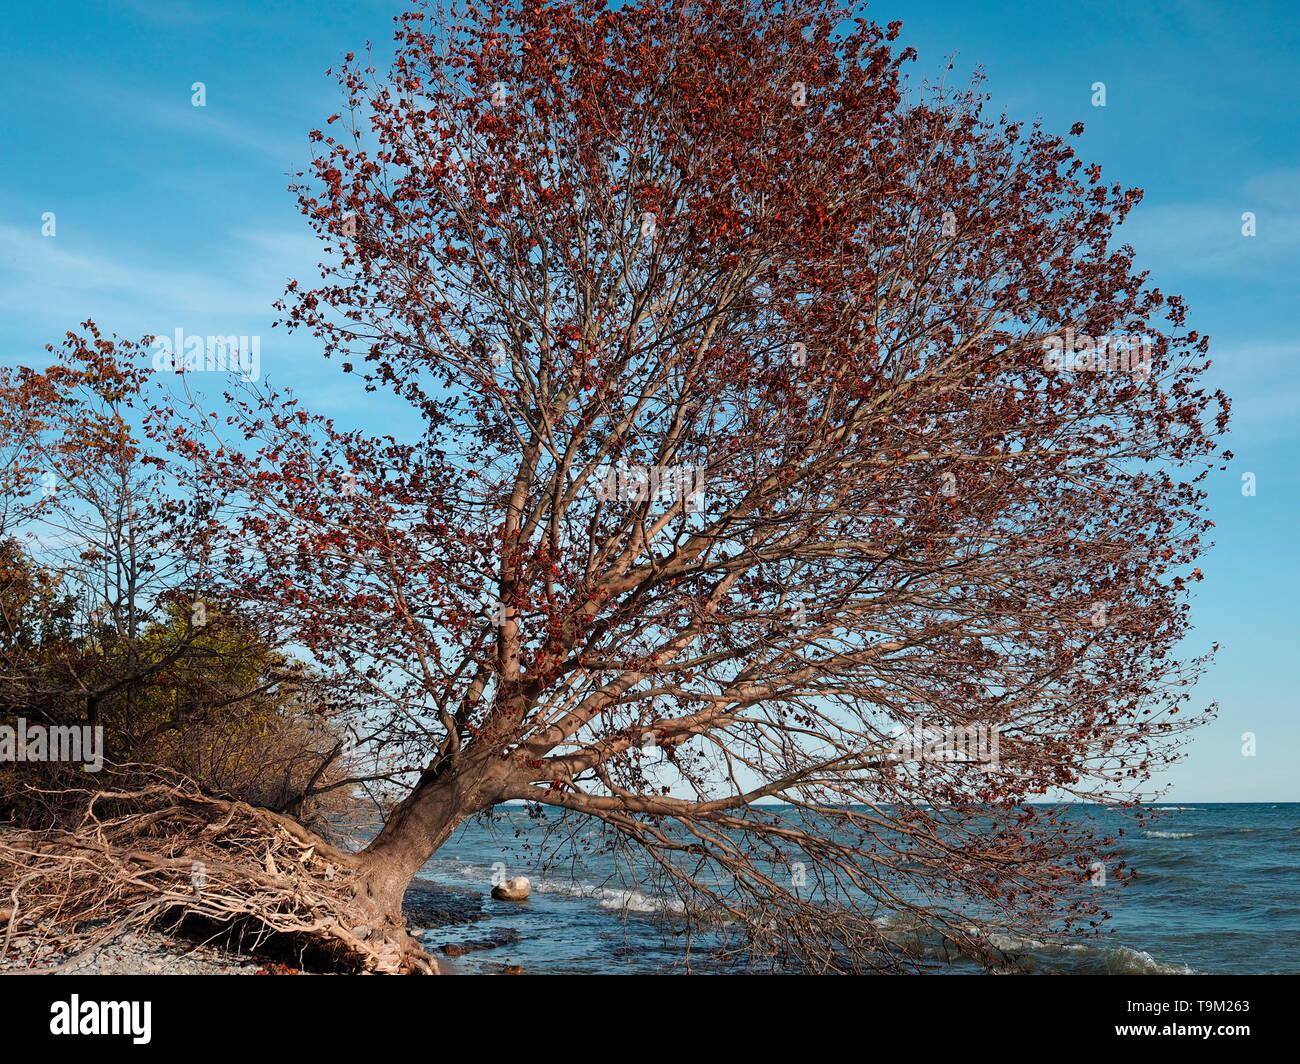 Tree with red leaves uprooted along Lake Ontario, Canada on a clear, bright sunny day Stock Photo